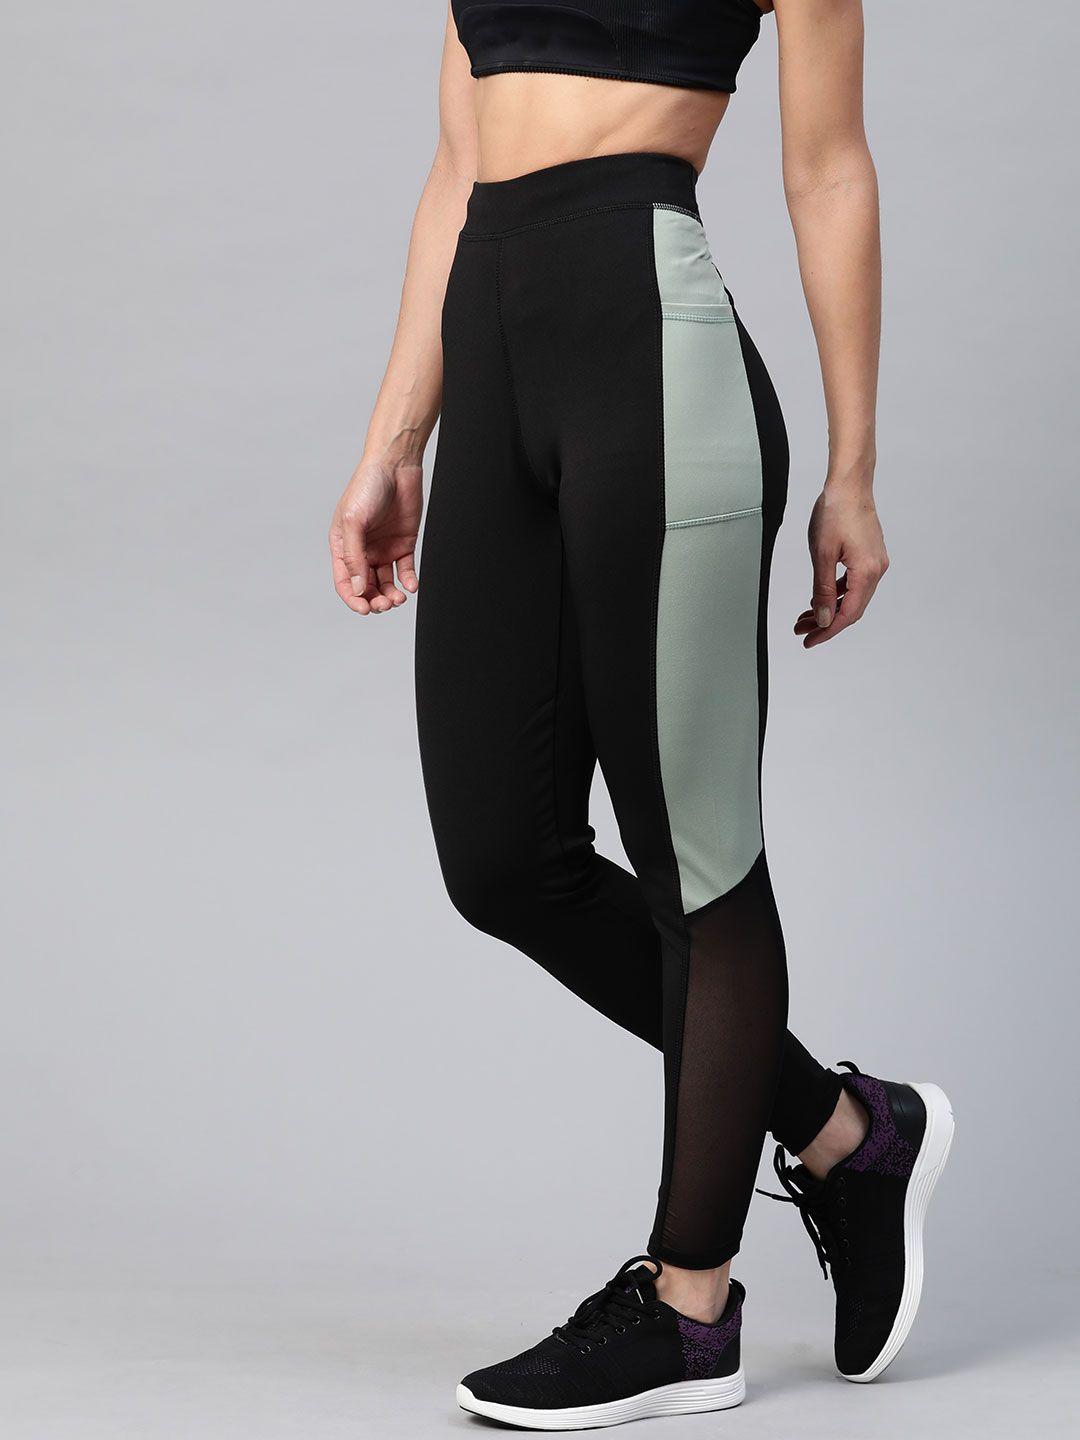 m7-by-metronaut-women-black-&-green-colourblocked-high-rise-solid-training-tights